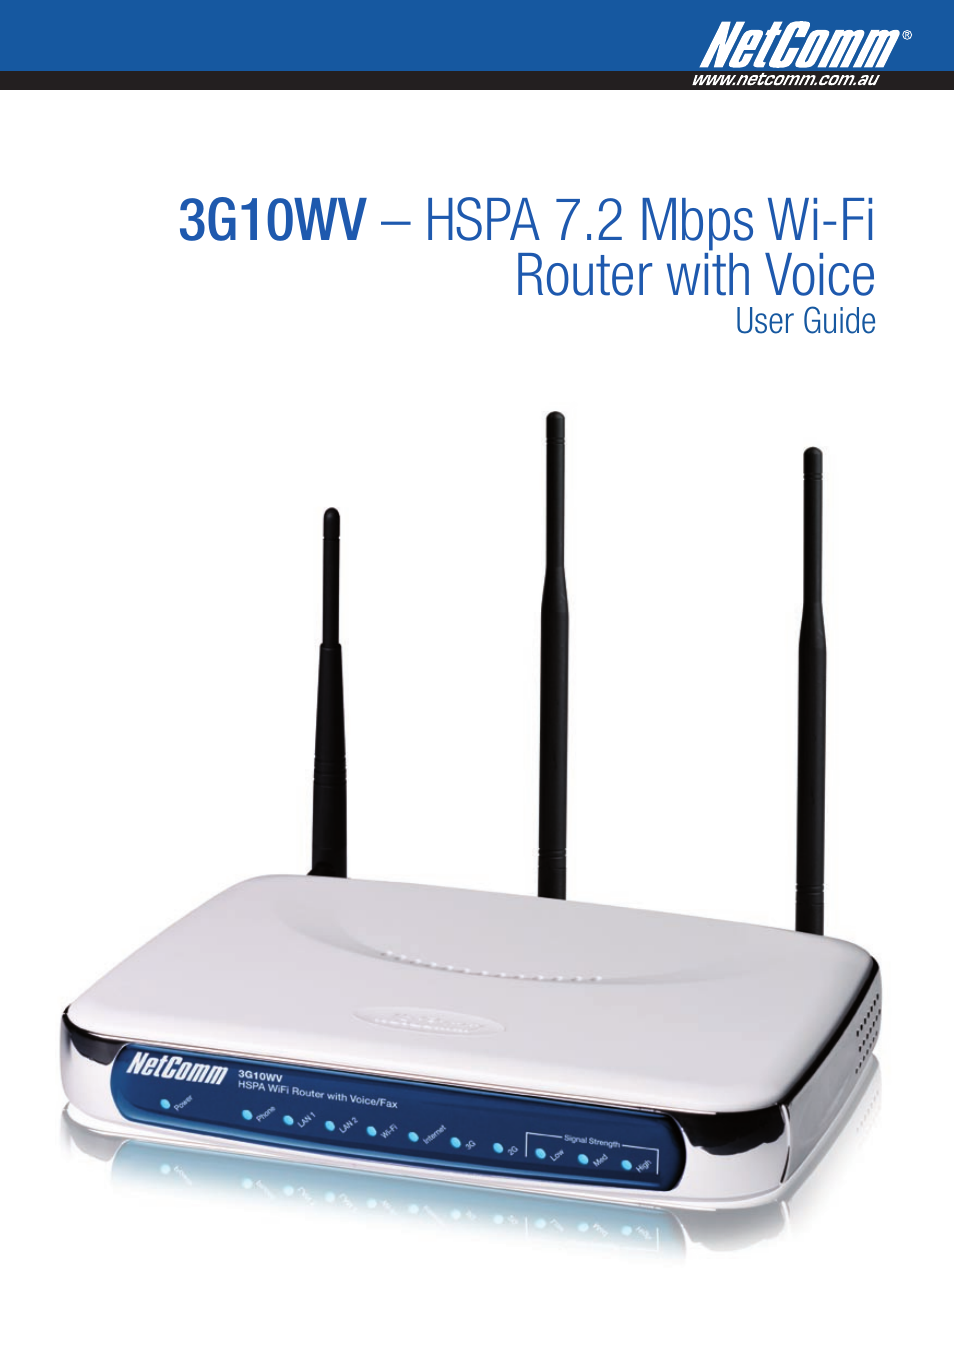 NordicTrack ROUTER WITH VOICE 3G10WV User Manual | 96 pages